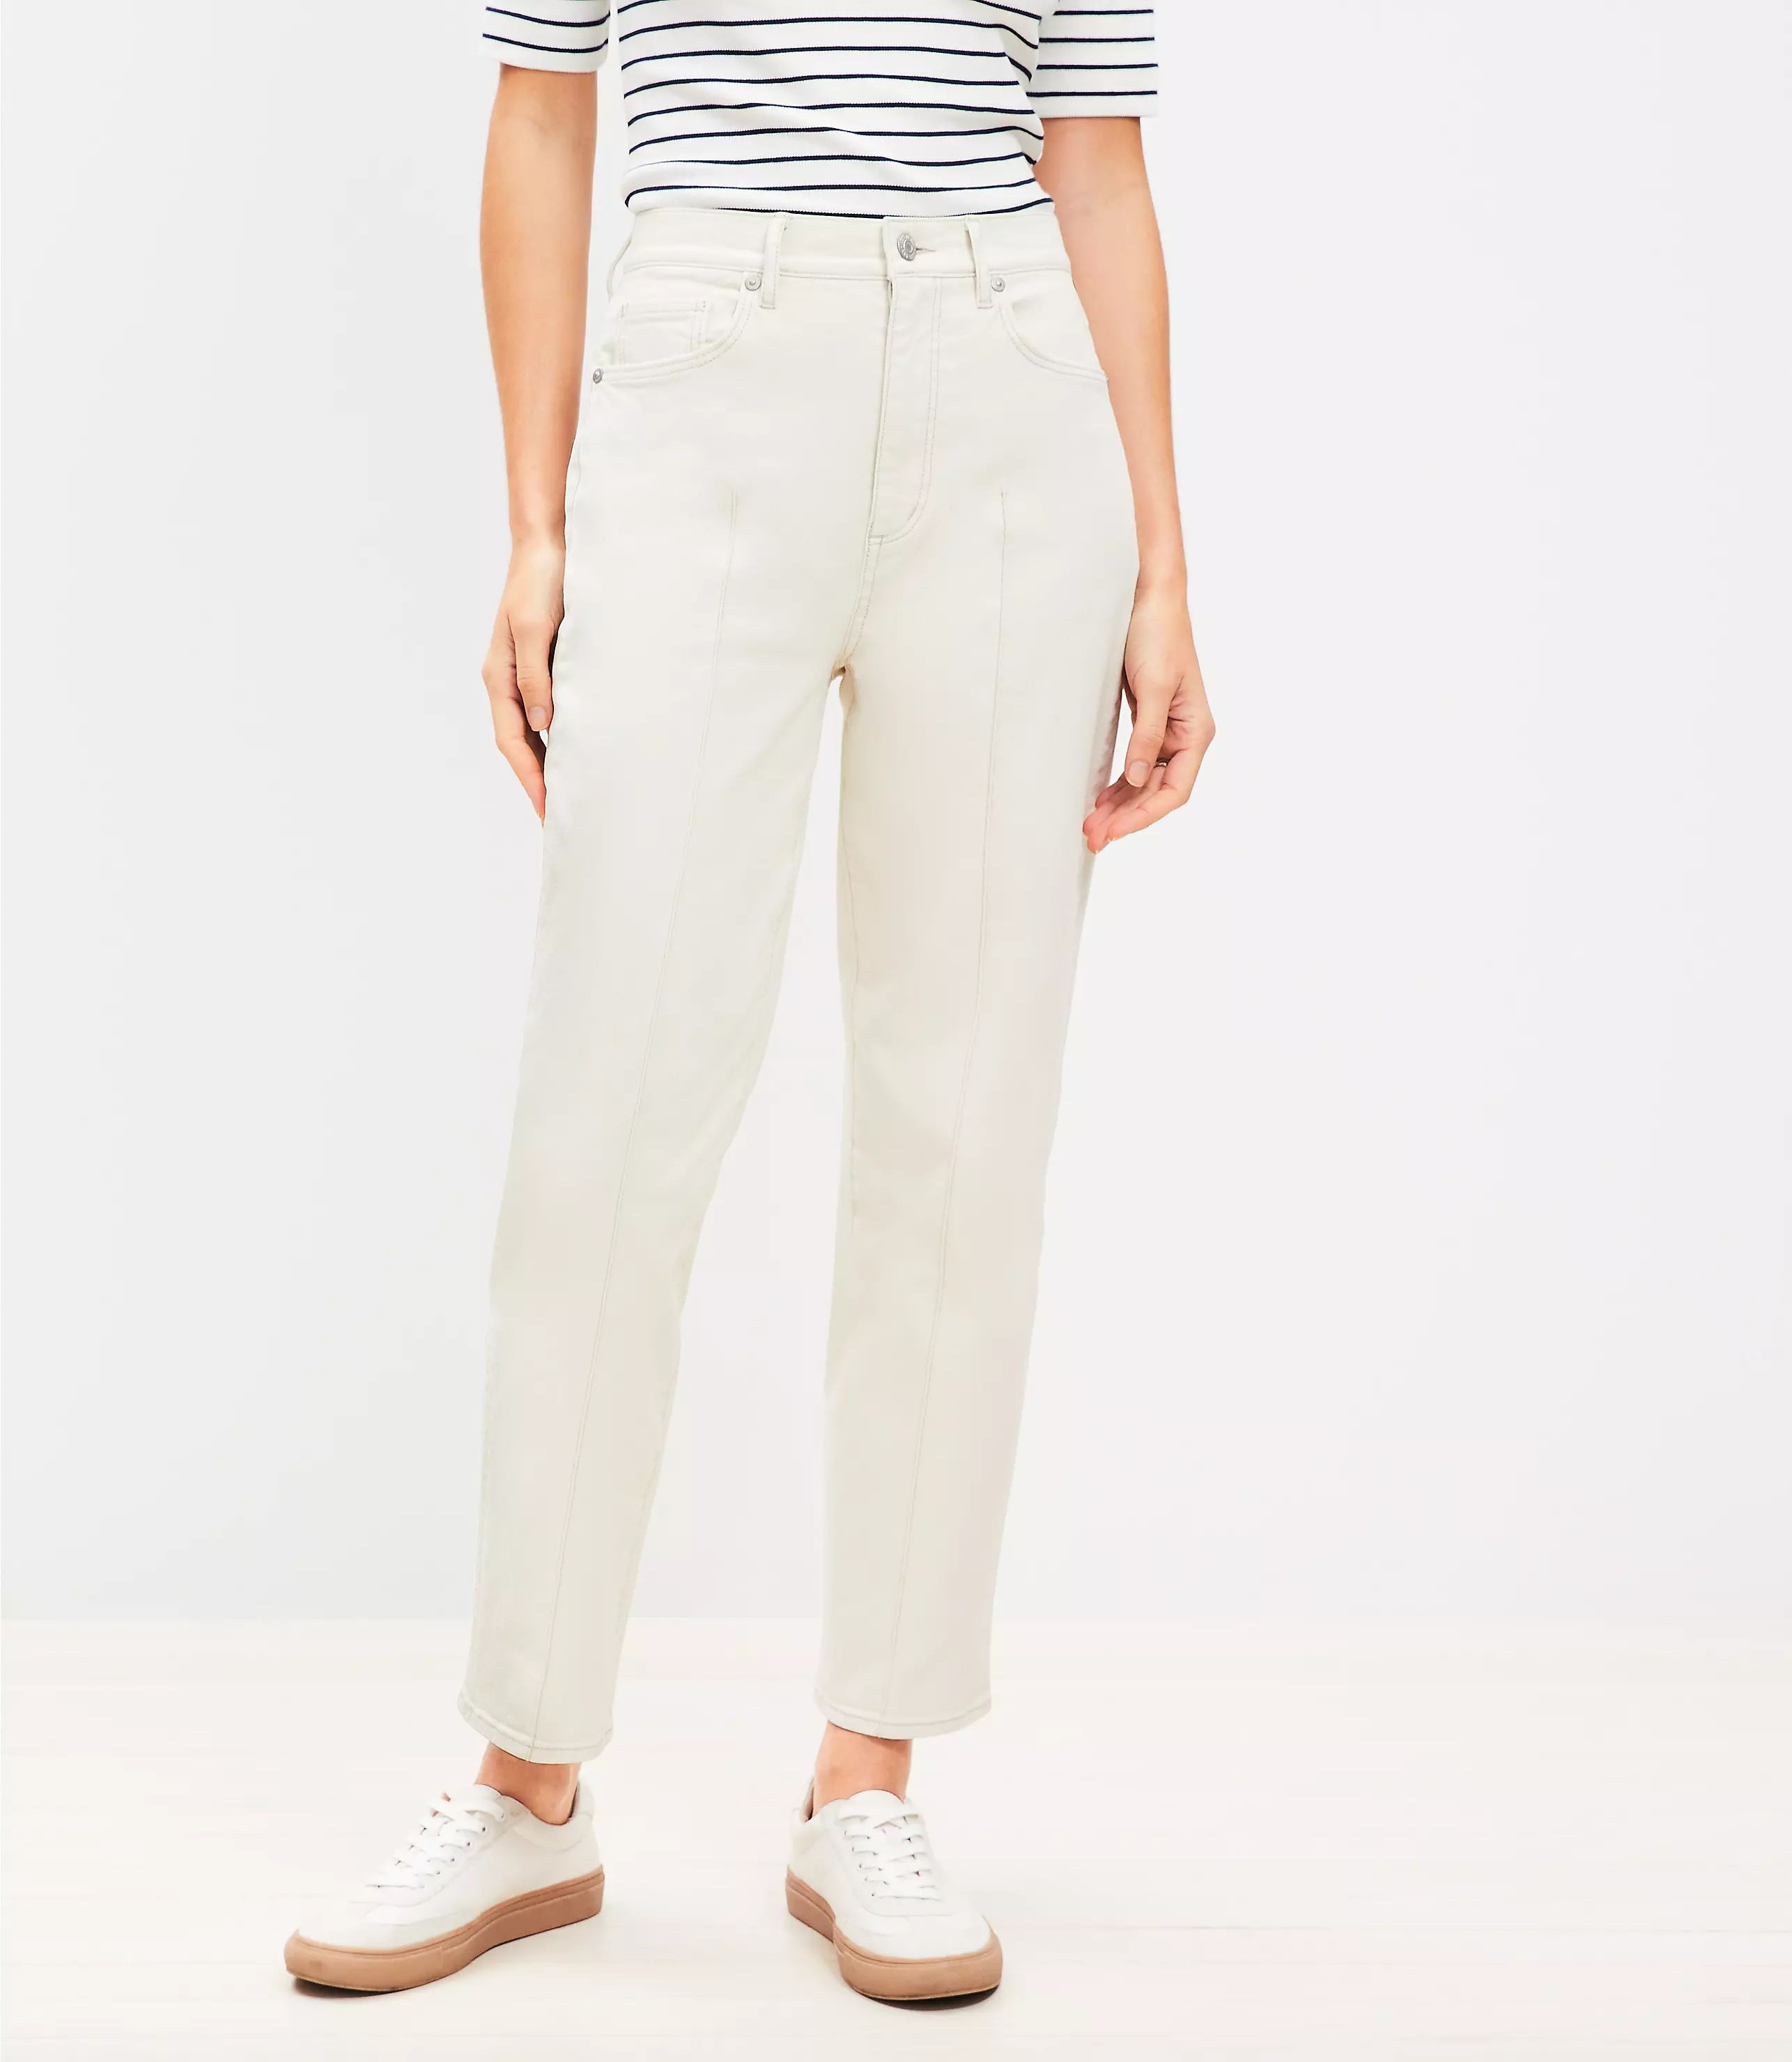 Petite Pintucked High Rise Straight Jeans in Popcorn | LOFT